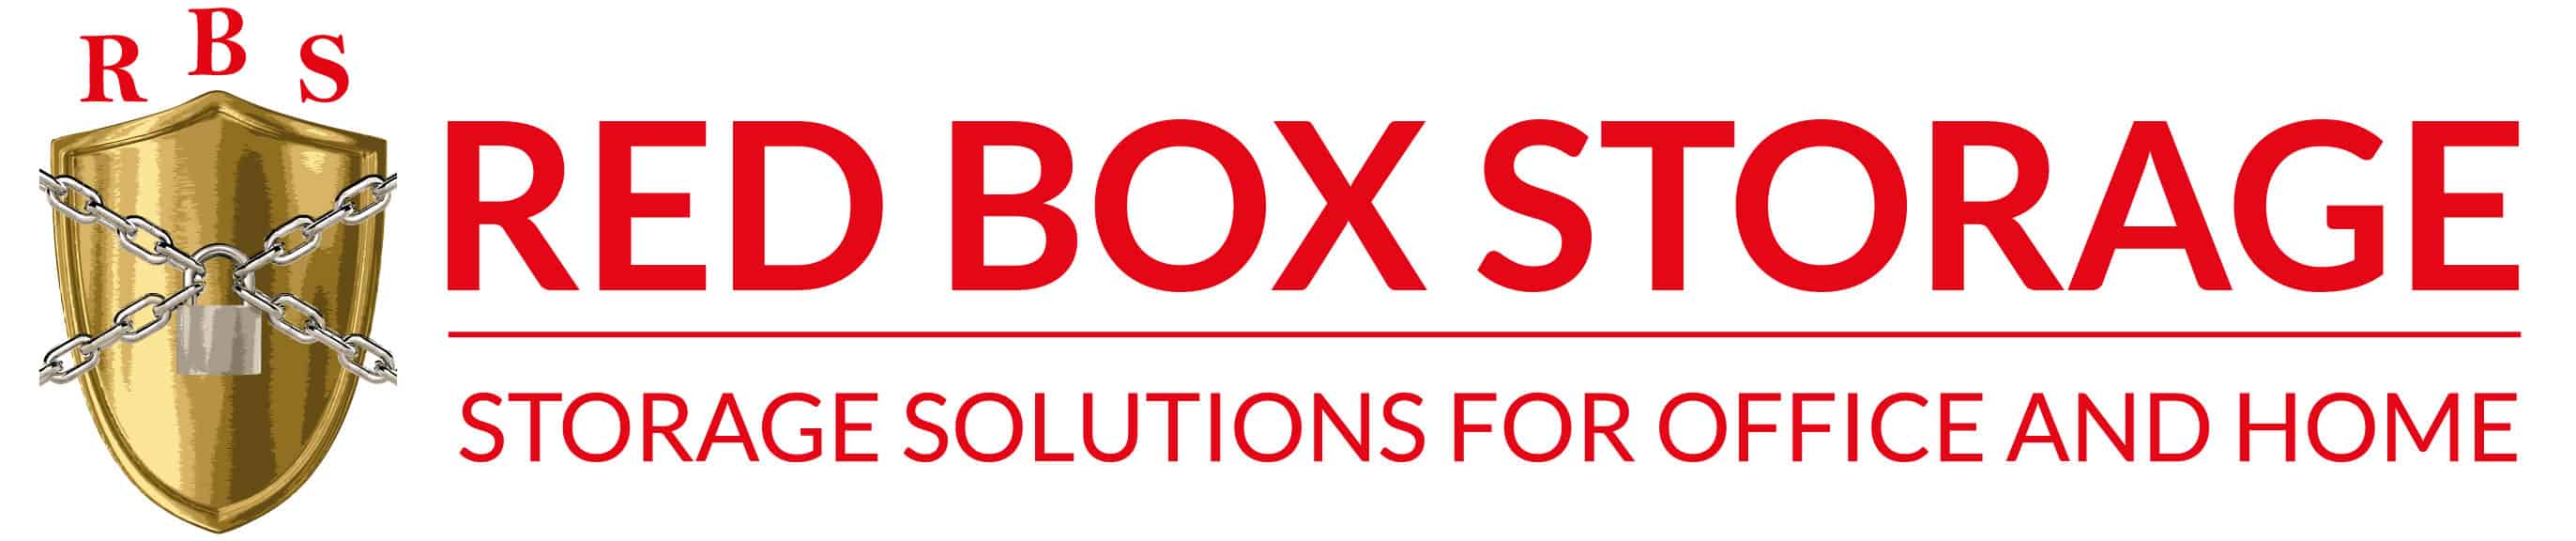 Office Red Box Logo - Hire, Rent or Buy Plastic Storage Crates, Boxes, Containers